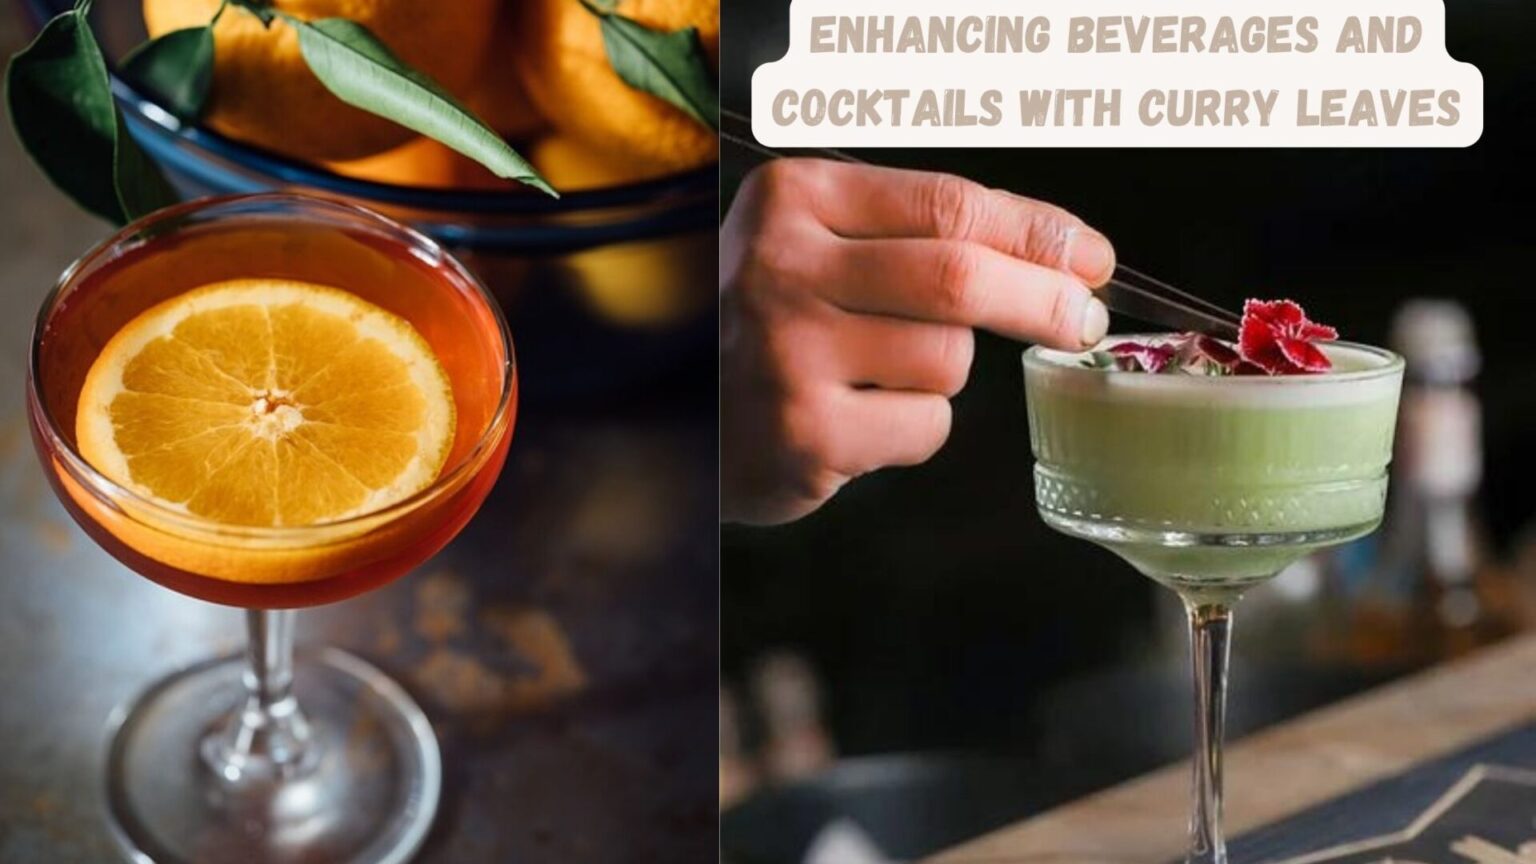 Enhancing Beverages and Cocktails with Curry Leaves